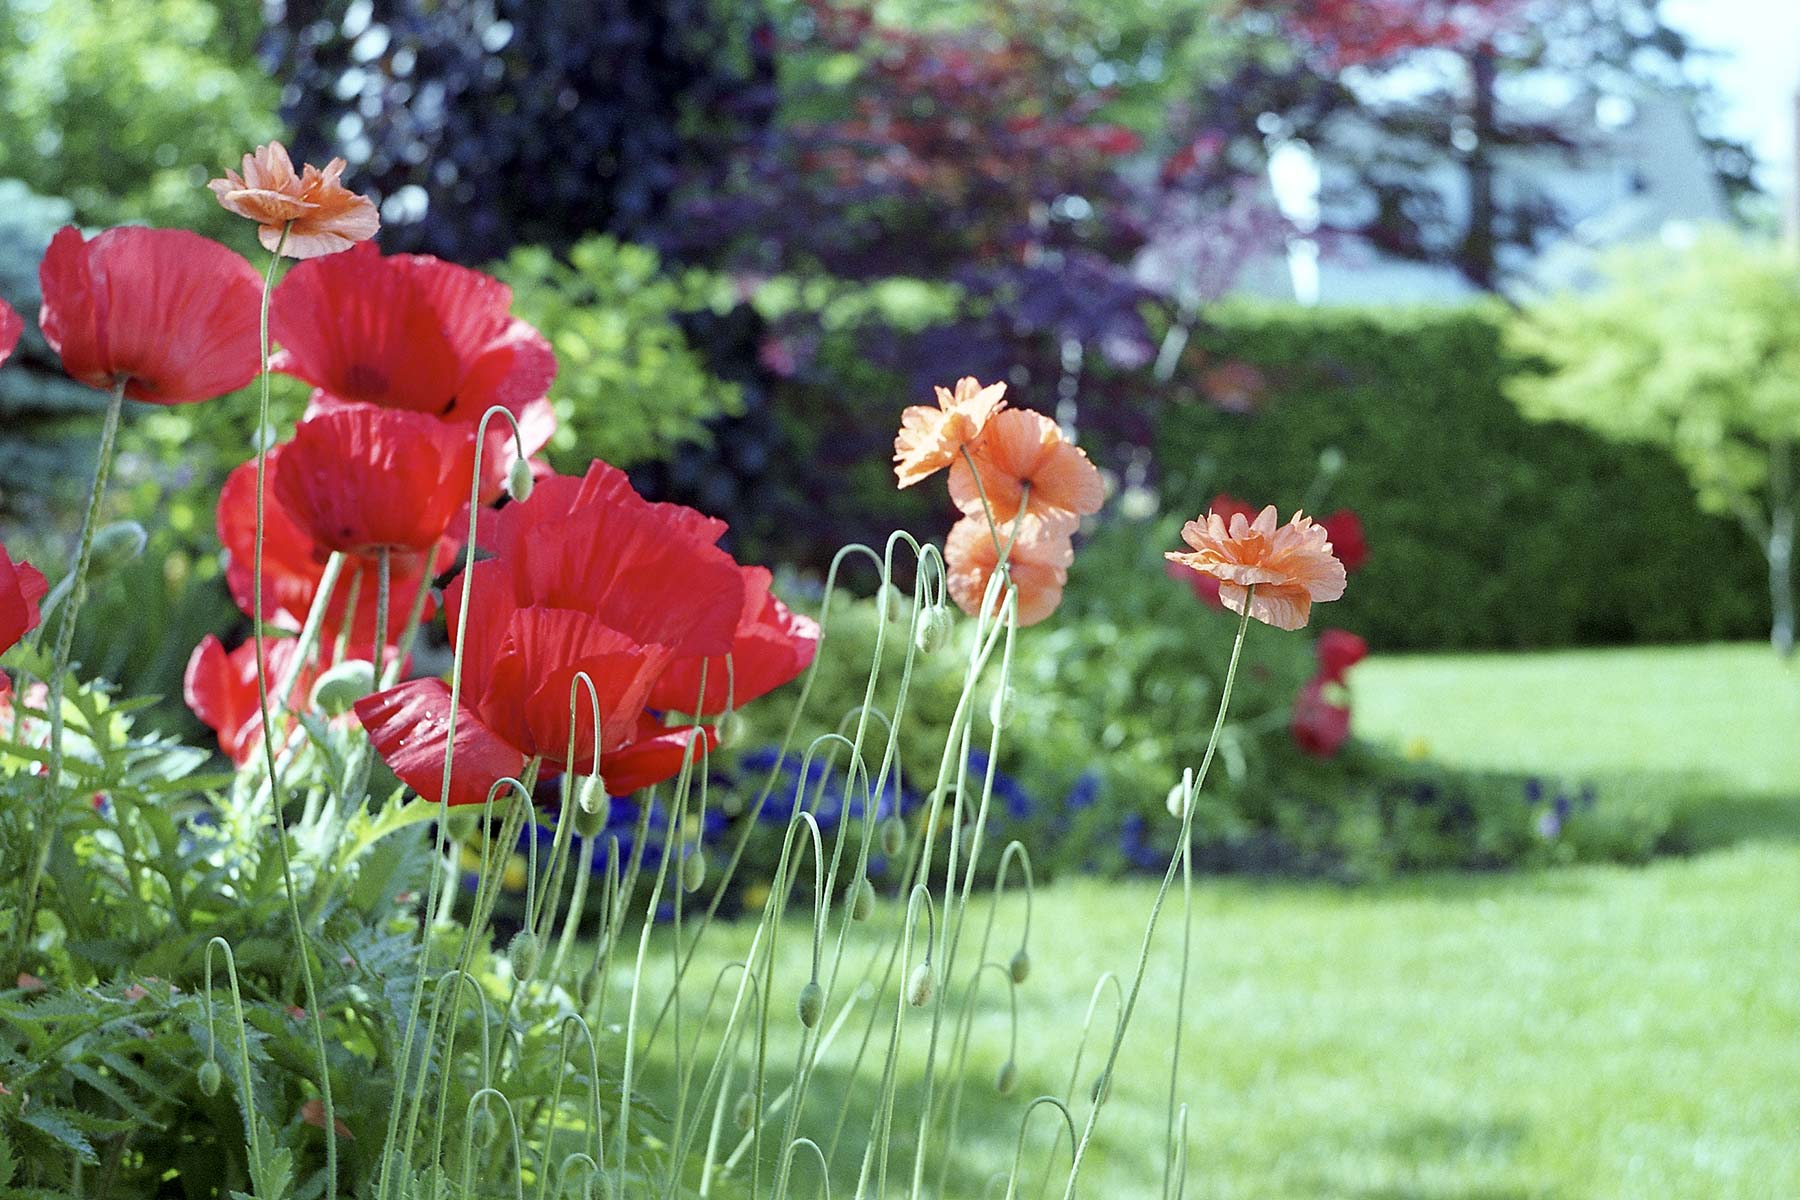 Two kinds of poppies Reala